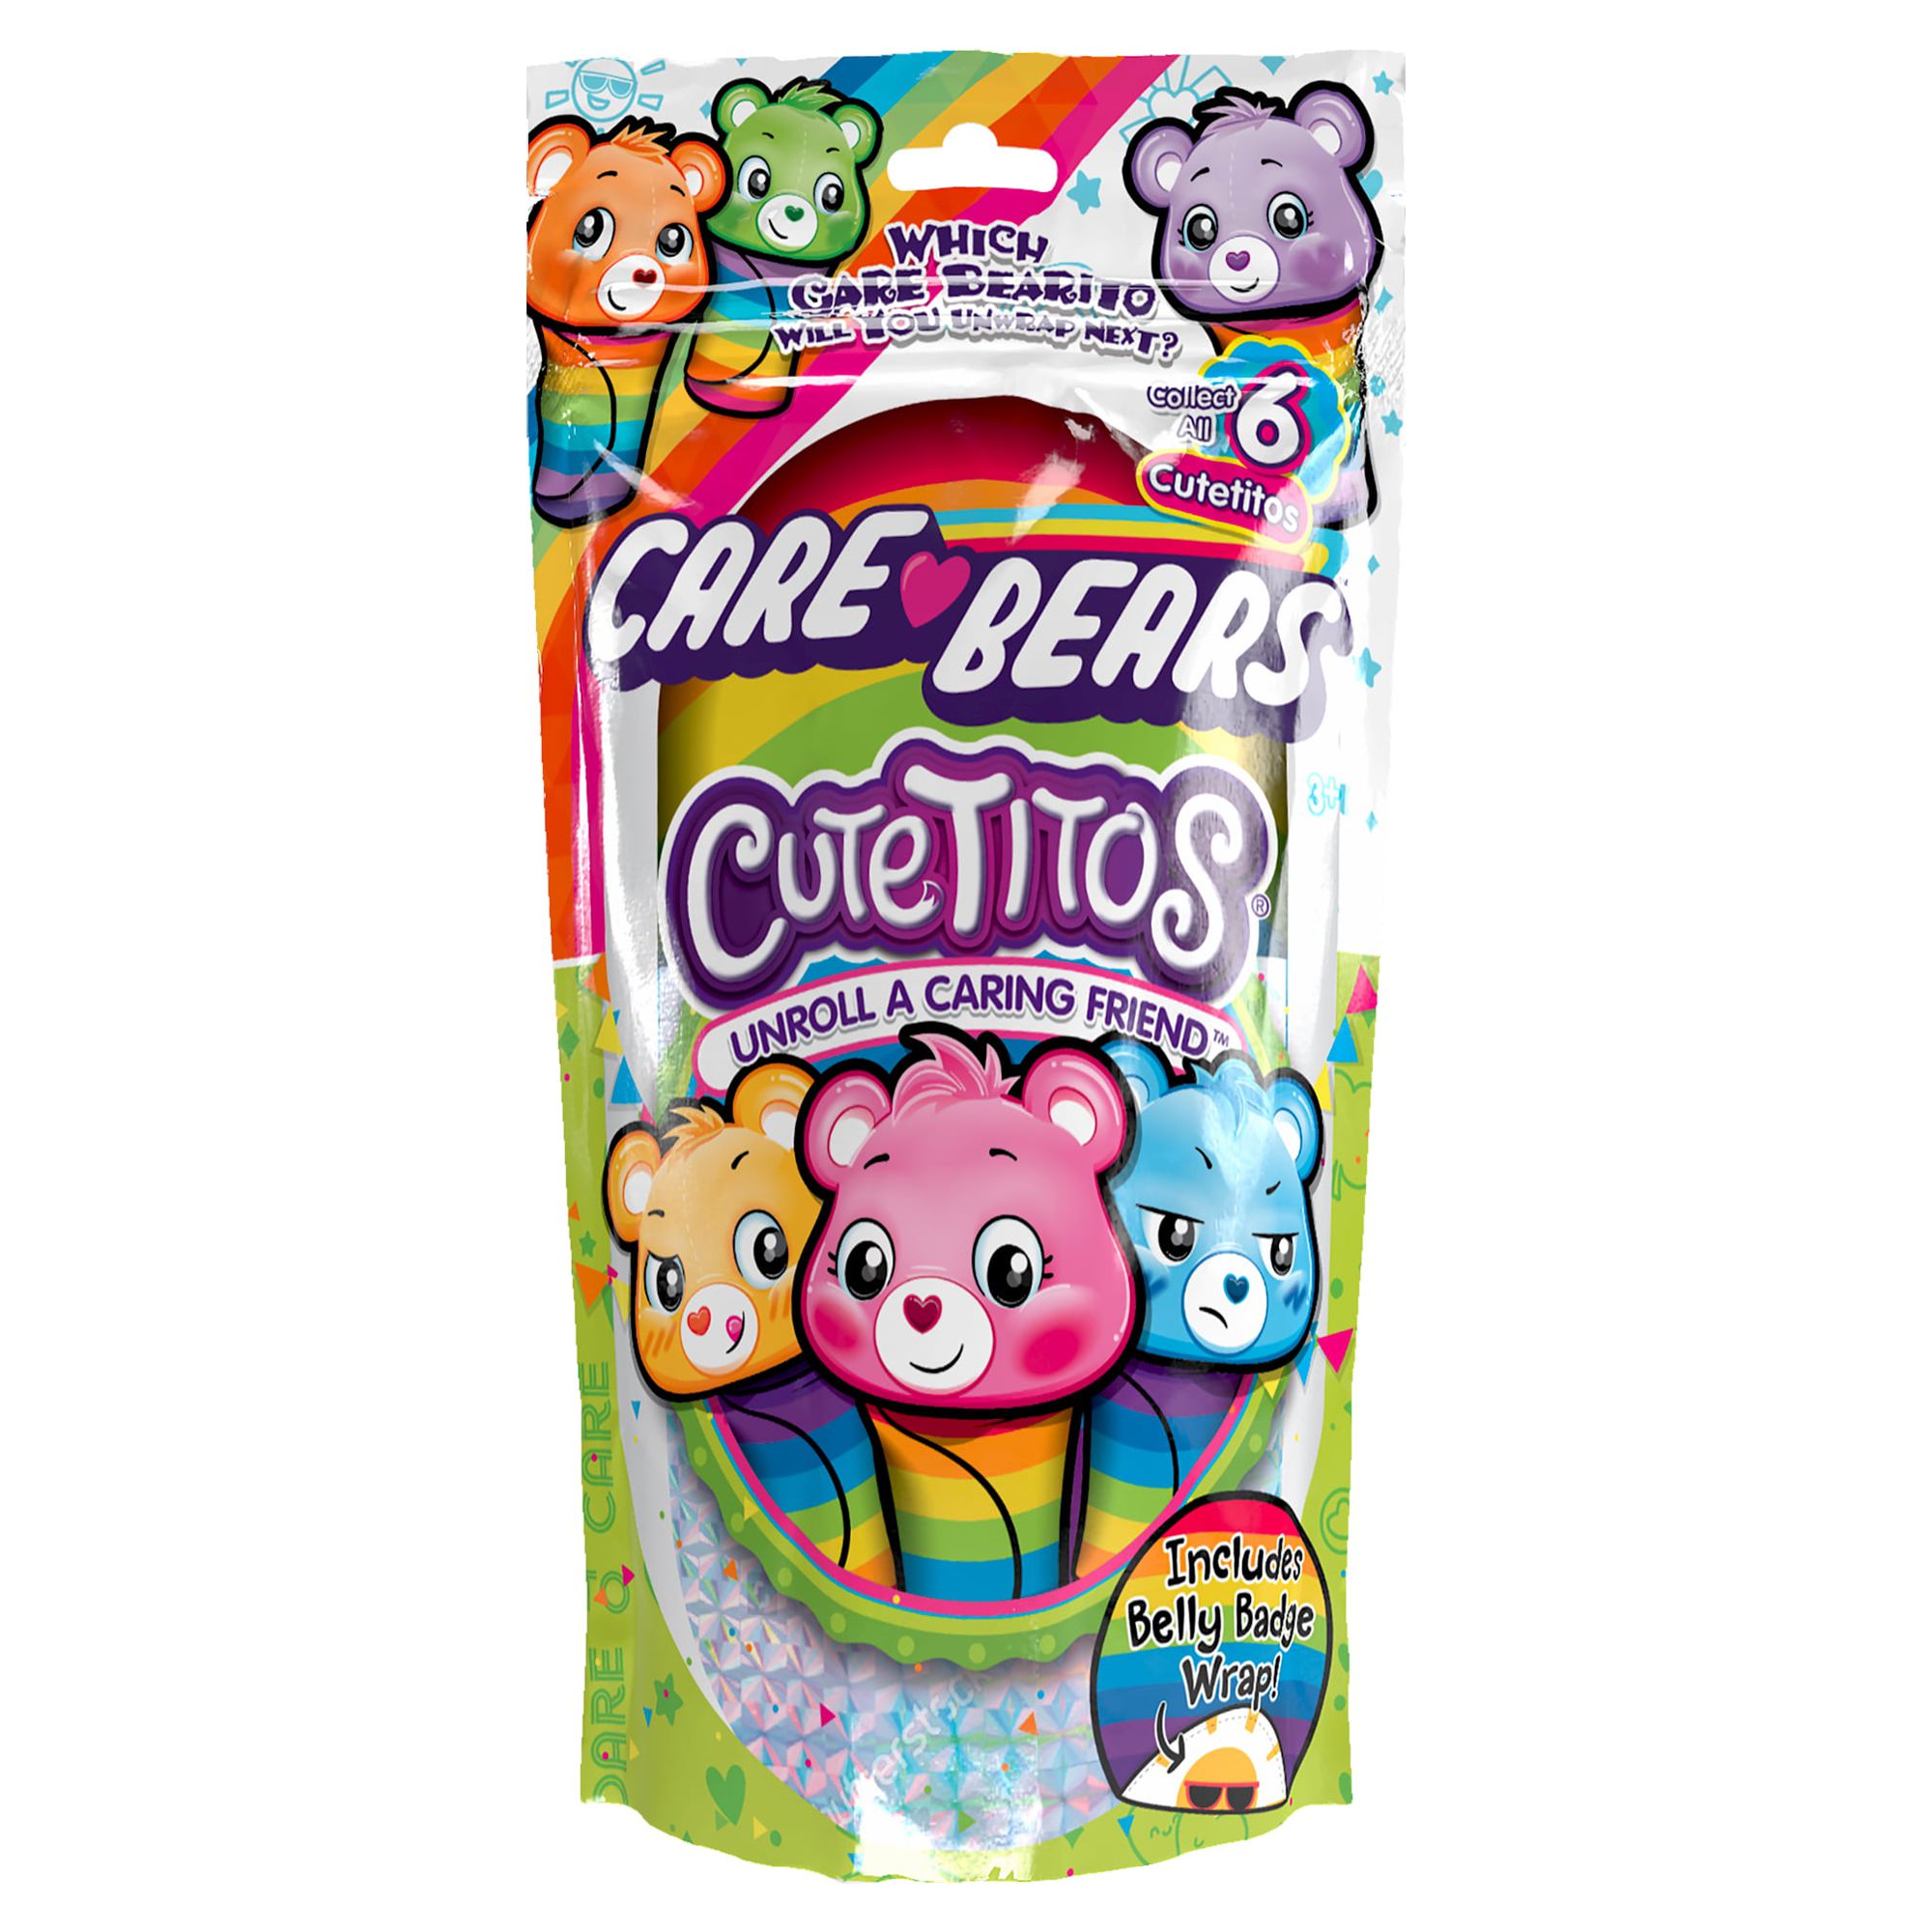 Care Bears Cutetitos-Surprise Stuffed Animals-Collectible - image 3 of 5